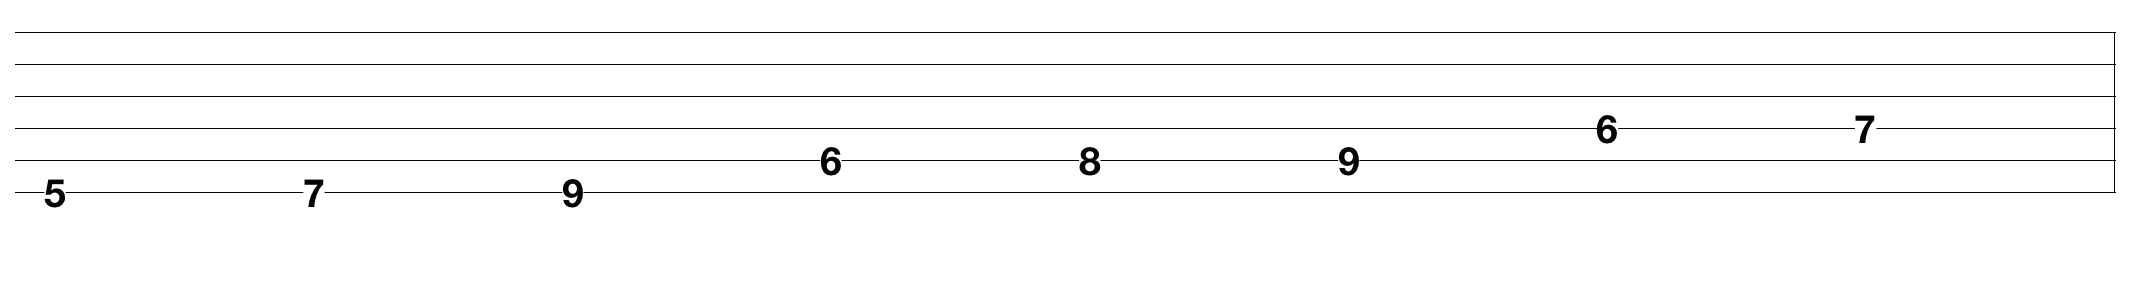 melodic-guitar-scales_3.png